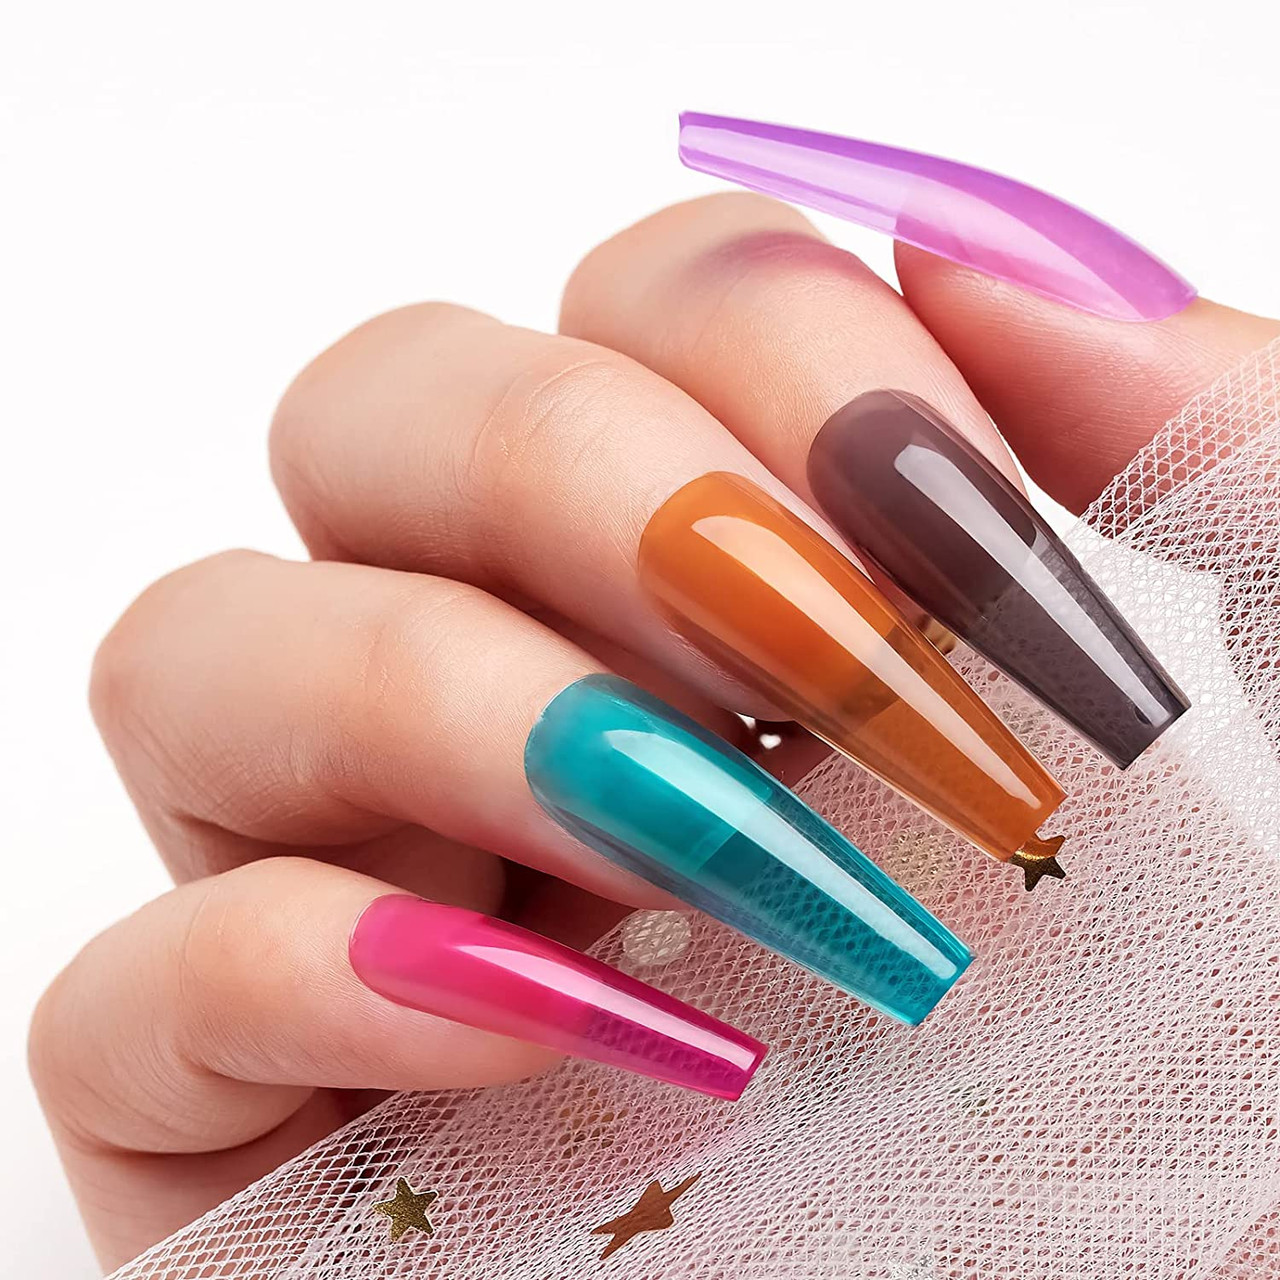 Pro Acrylic Acrylic Nail Art Set With Drill Machine, Liquid Glitter Powder  Tips, Brush Tool, And Full Manicure Set From Huangcen, $32.89 | DHgate.Com